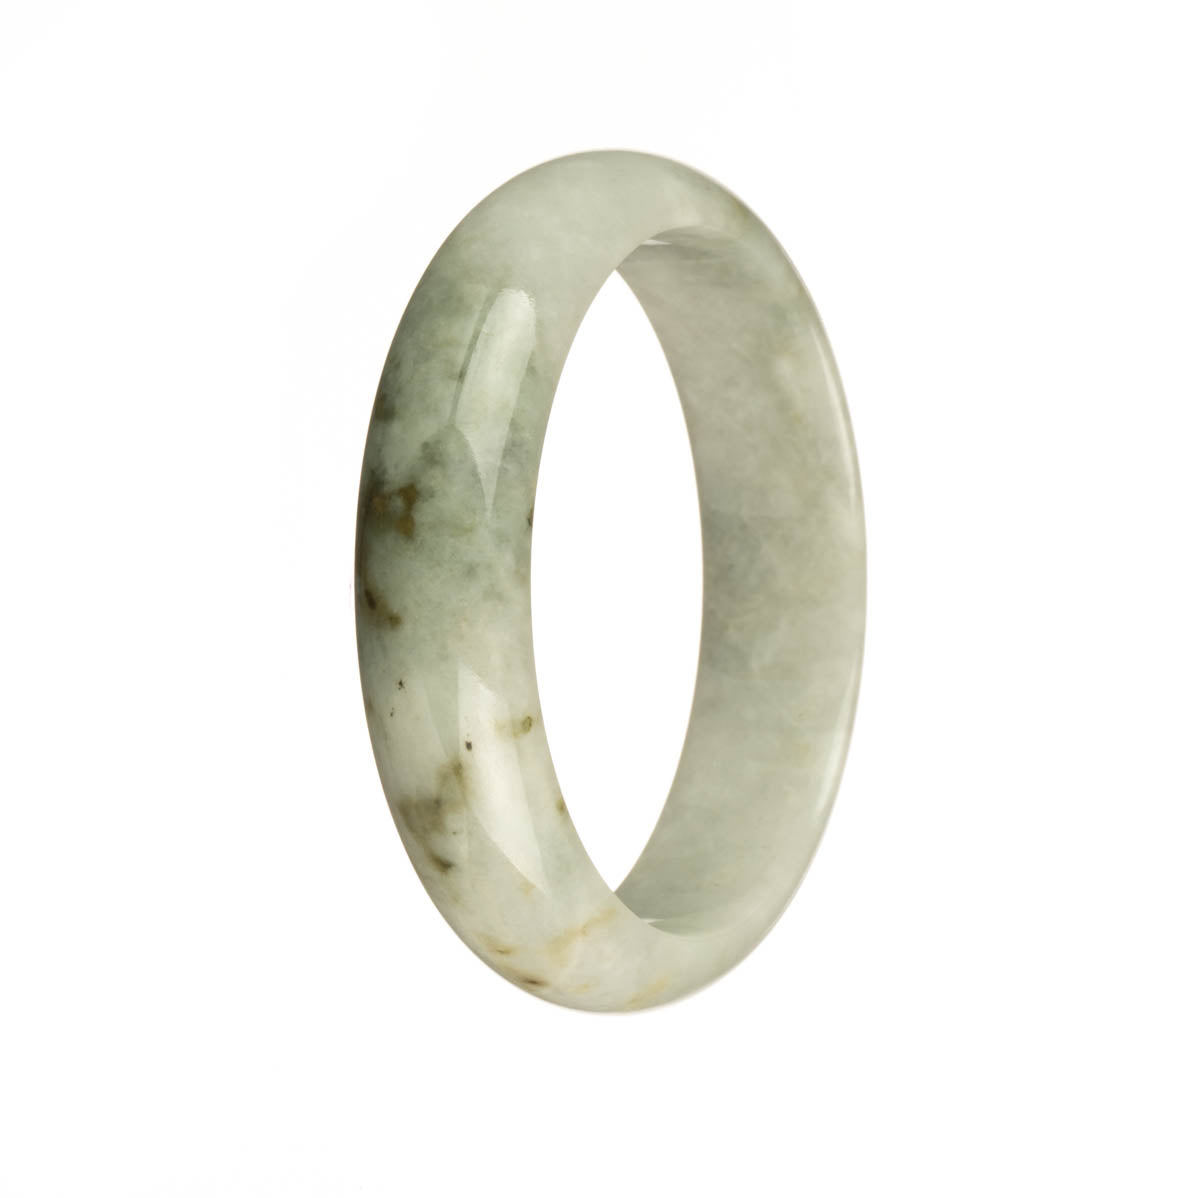 A beautiful Burmese jade bracelet, featuring authentic Grade A white and pale green stones with brown spots. The bracelet is crafted in a 56mm half moon shape and is offered by MAYS.